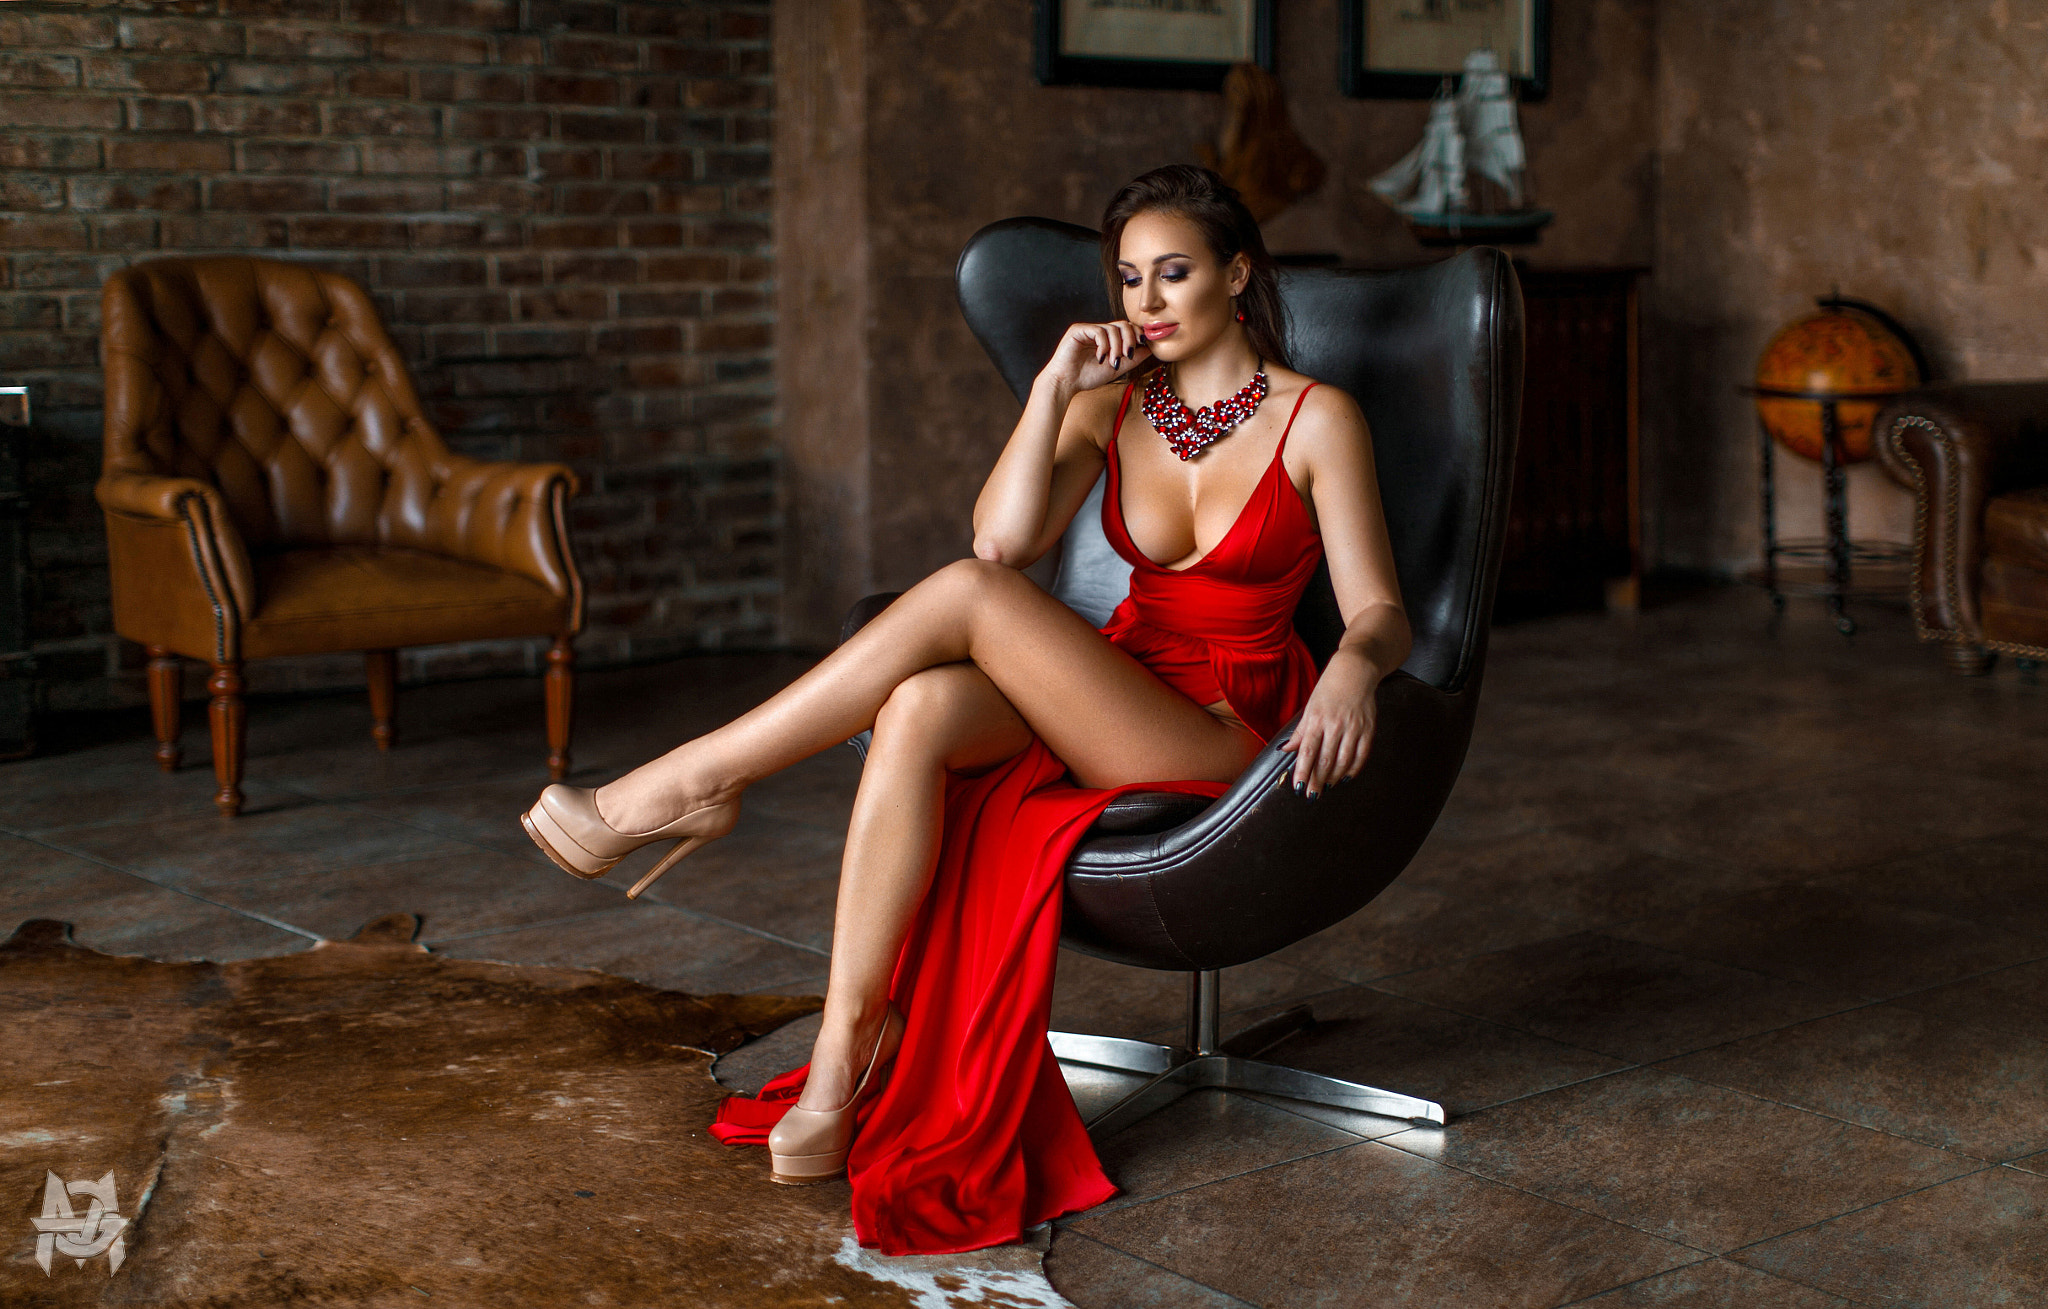 People 2048x1309 women Mihail Gerasimov sitting high heels red dress legs brunette painted nails legs crossed cleavage classy glamour touching face leather chair makeup